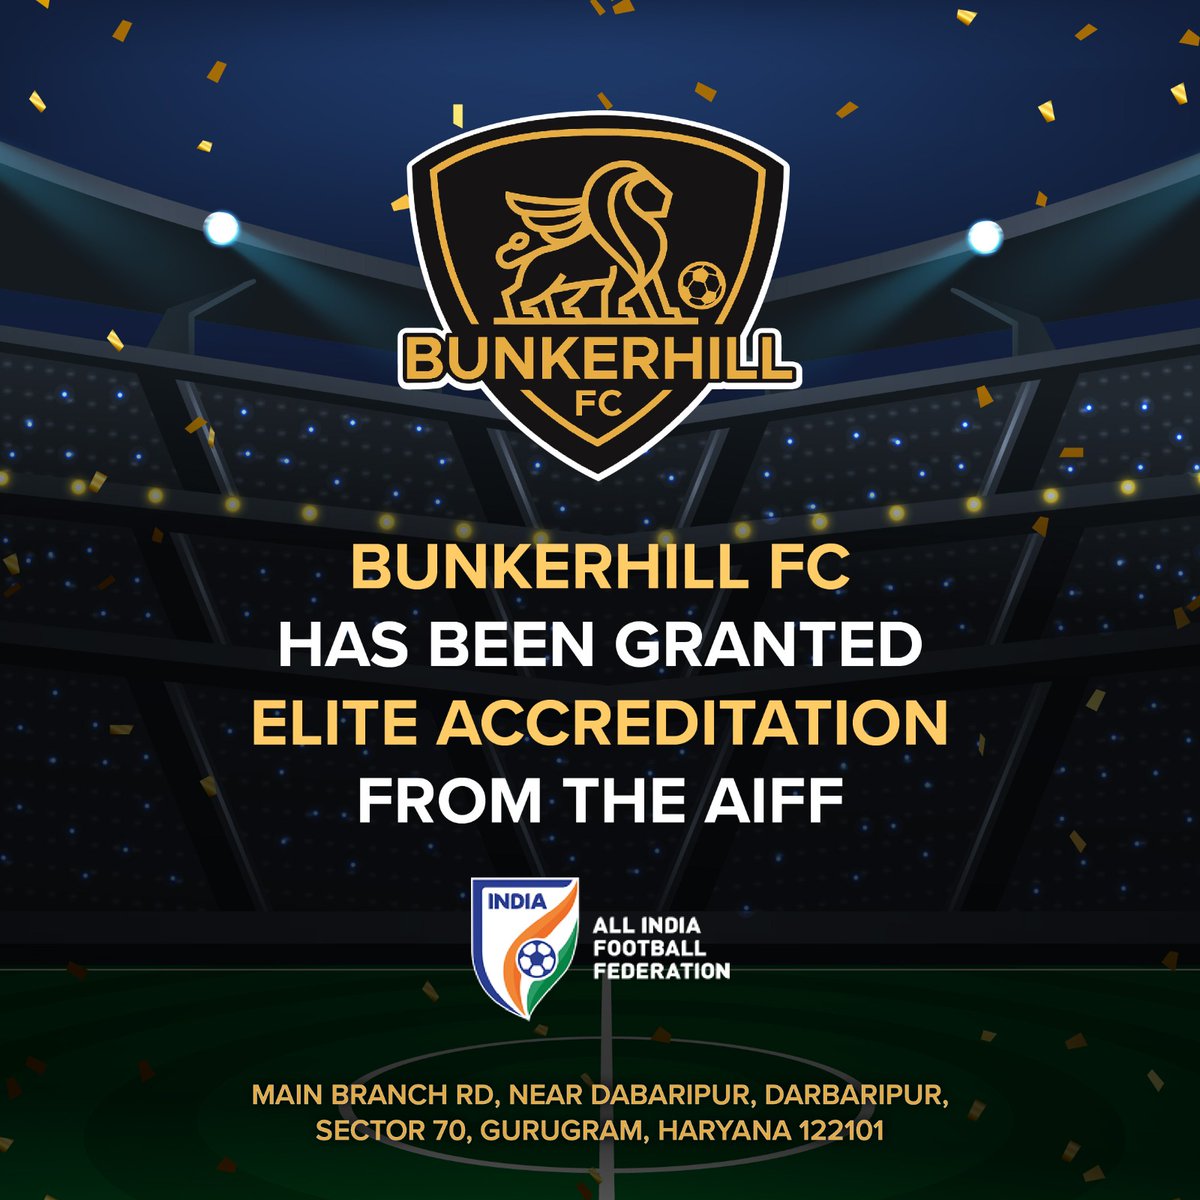 Bunkerhill is committed to develop some top notch footballing talent in india . We have program with 100% scholarship for 100 kids every year .
Thanks #AIFF for grading us the elite status.